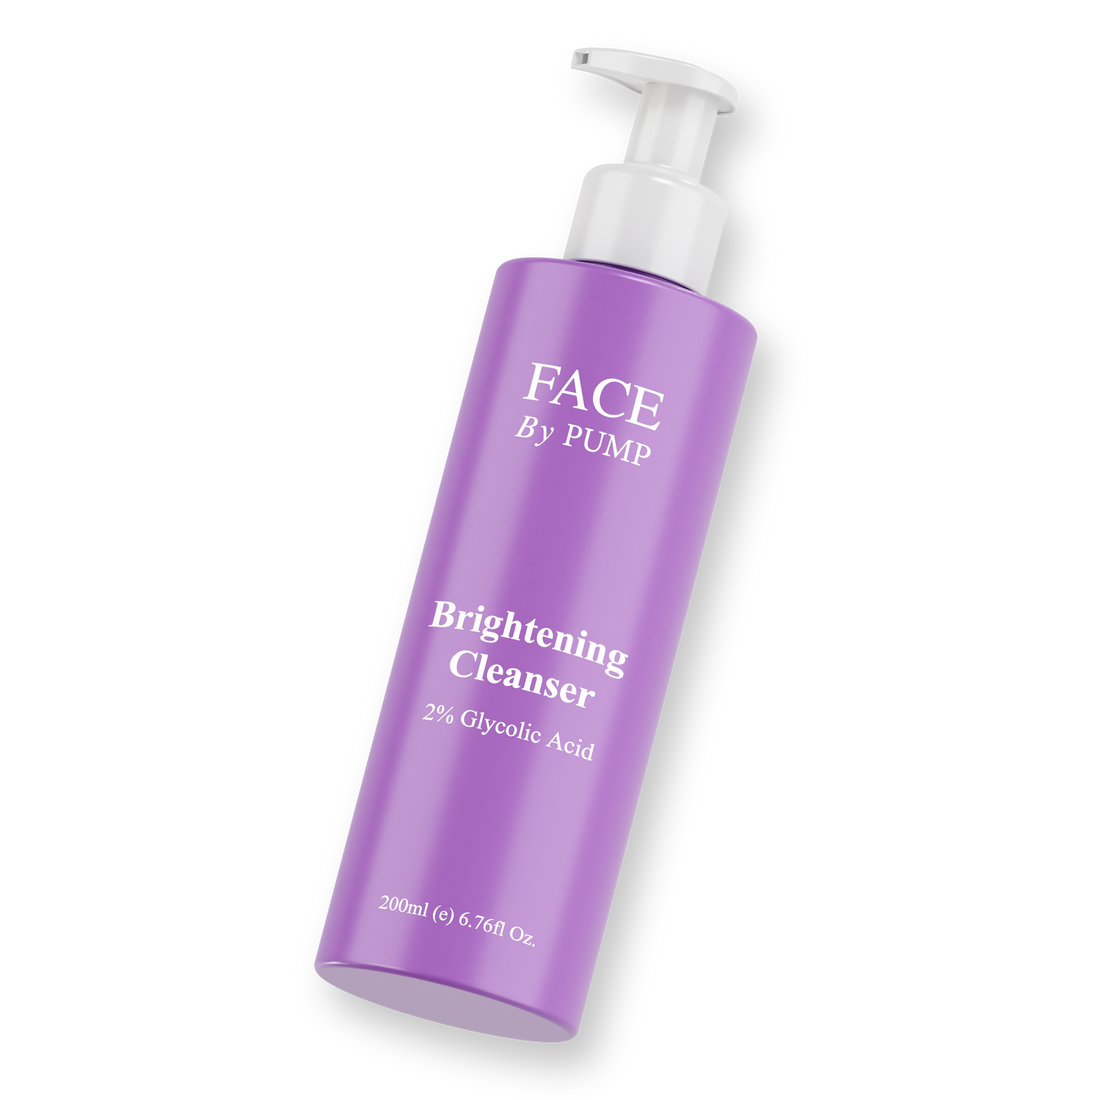 FACE By PUMP Brightening Cleanser